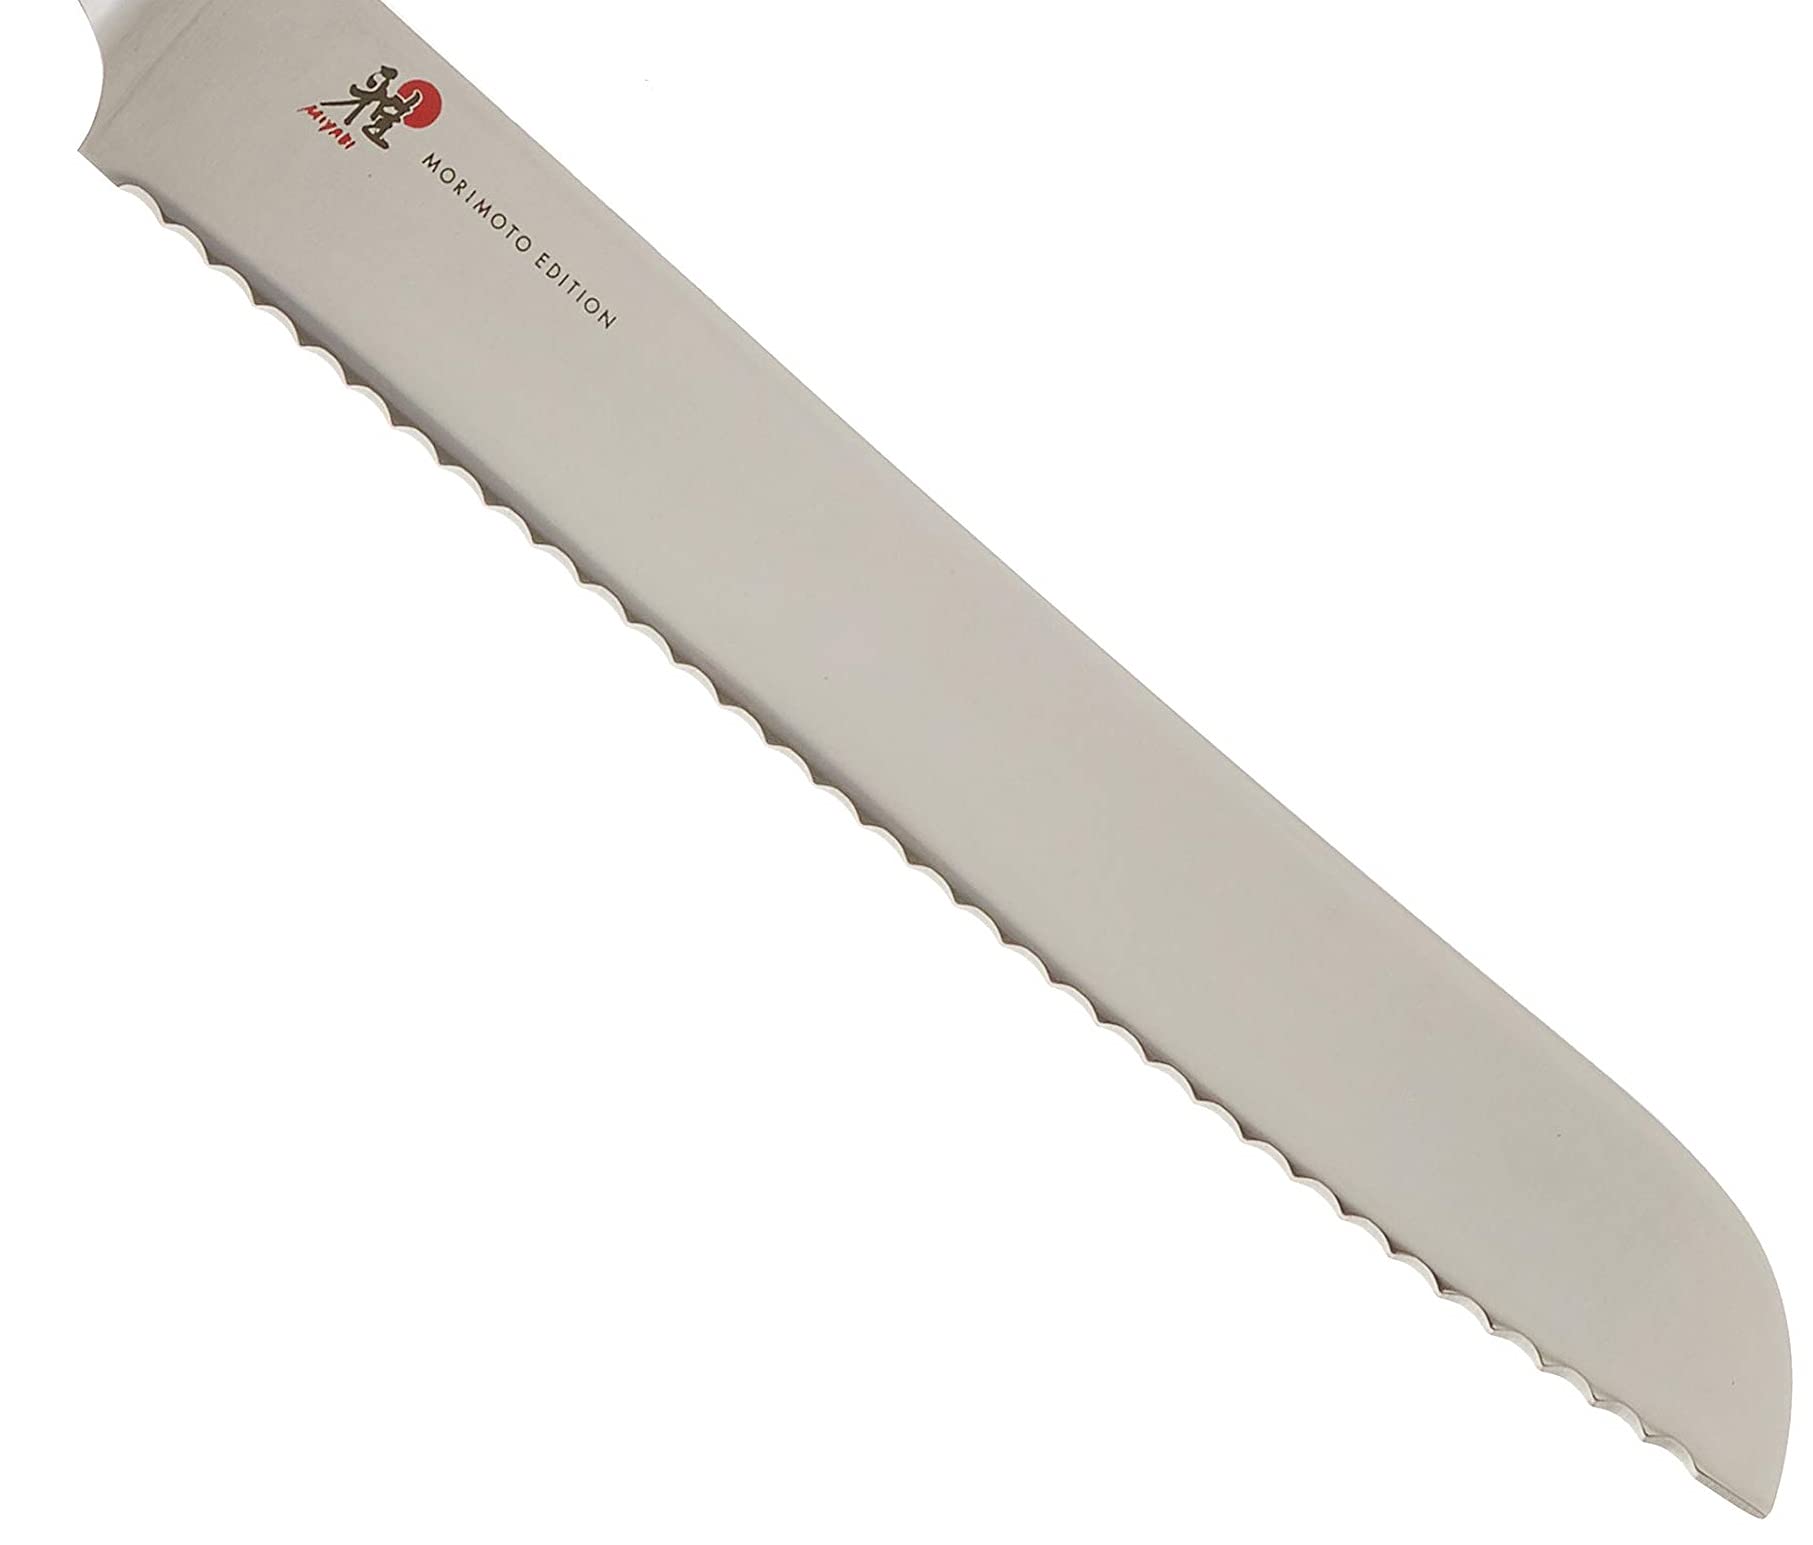 Miyabi Morimoto Edition Bread Knife, 9.5-inch, Black w/Red Accent/Stainless Steel